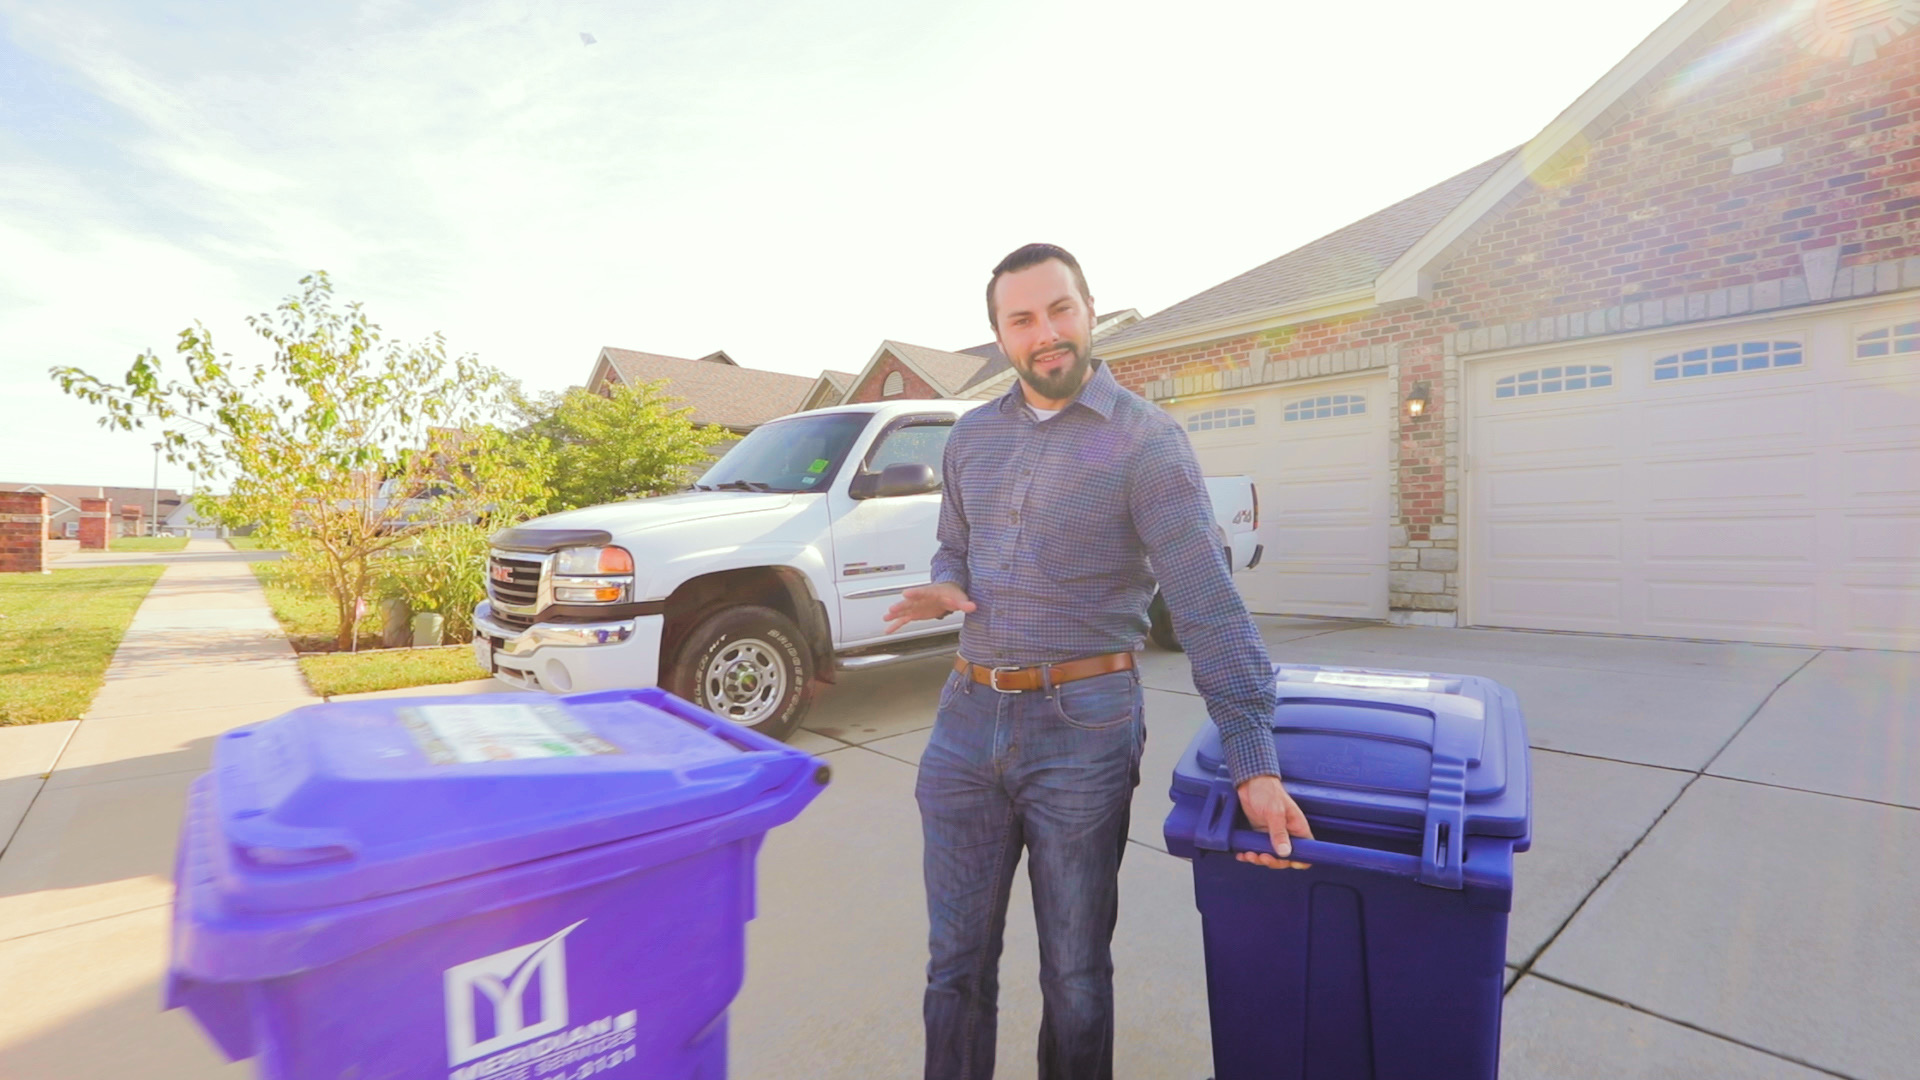 On Location: Dual-Stream Recycling Video Shoot